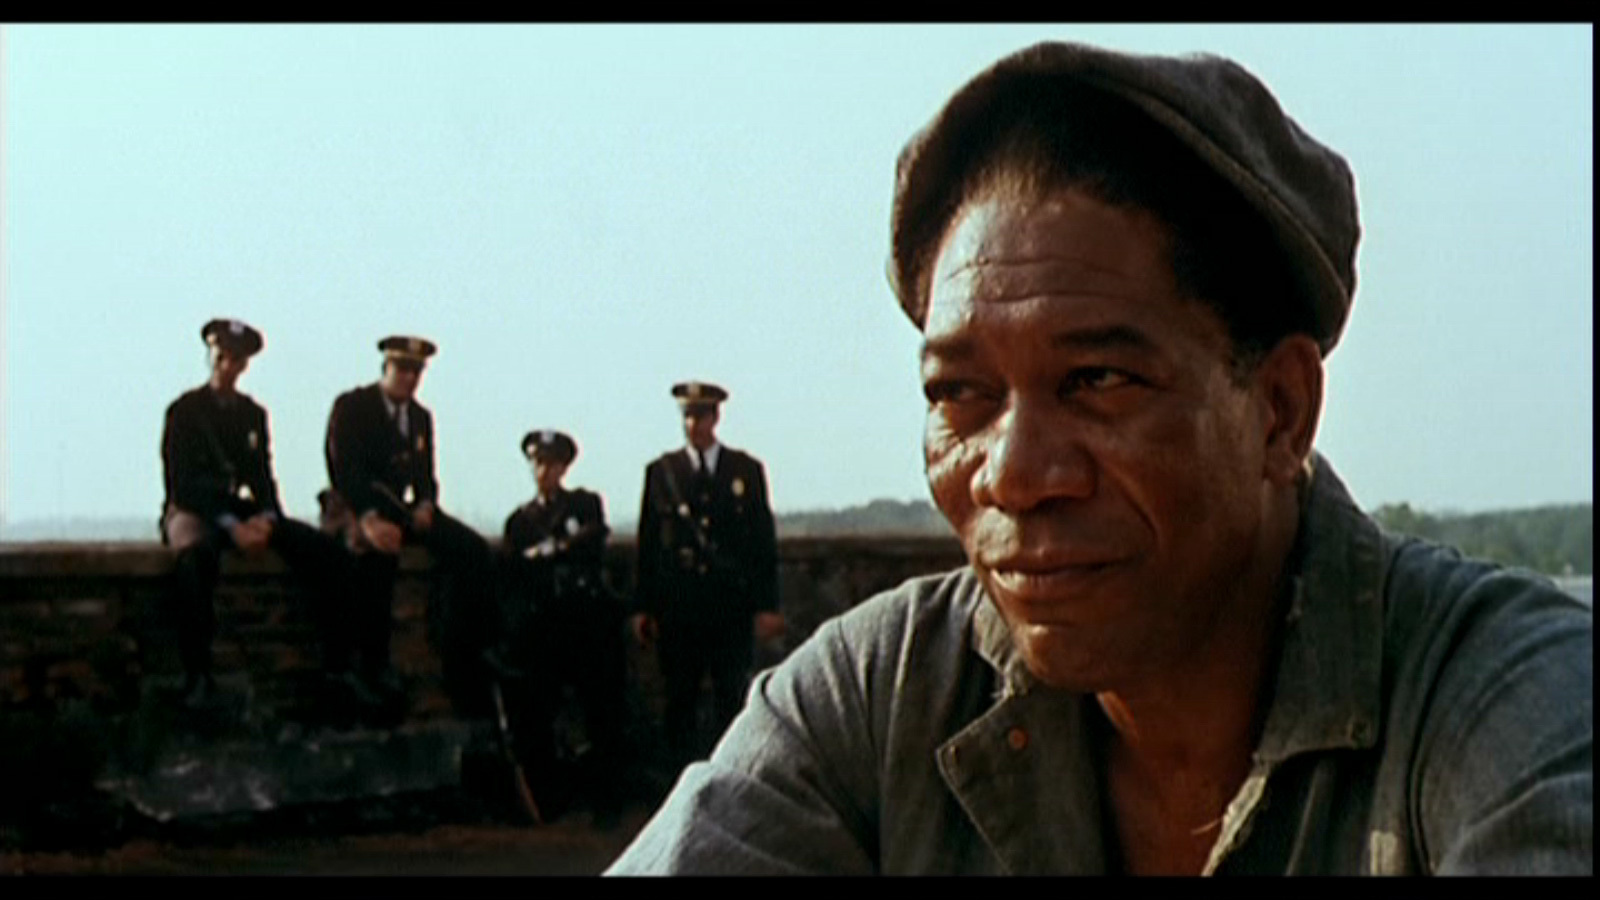 Shawshank redemption analysis conflicting perspectives